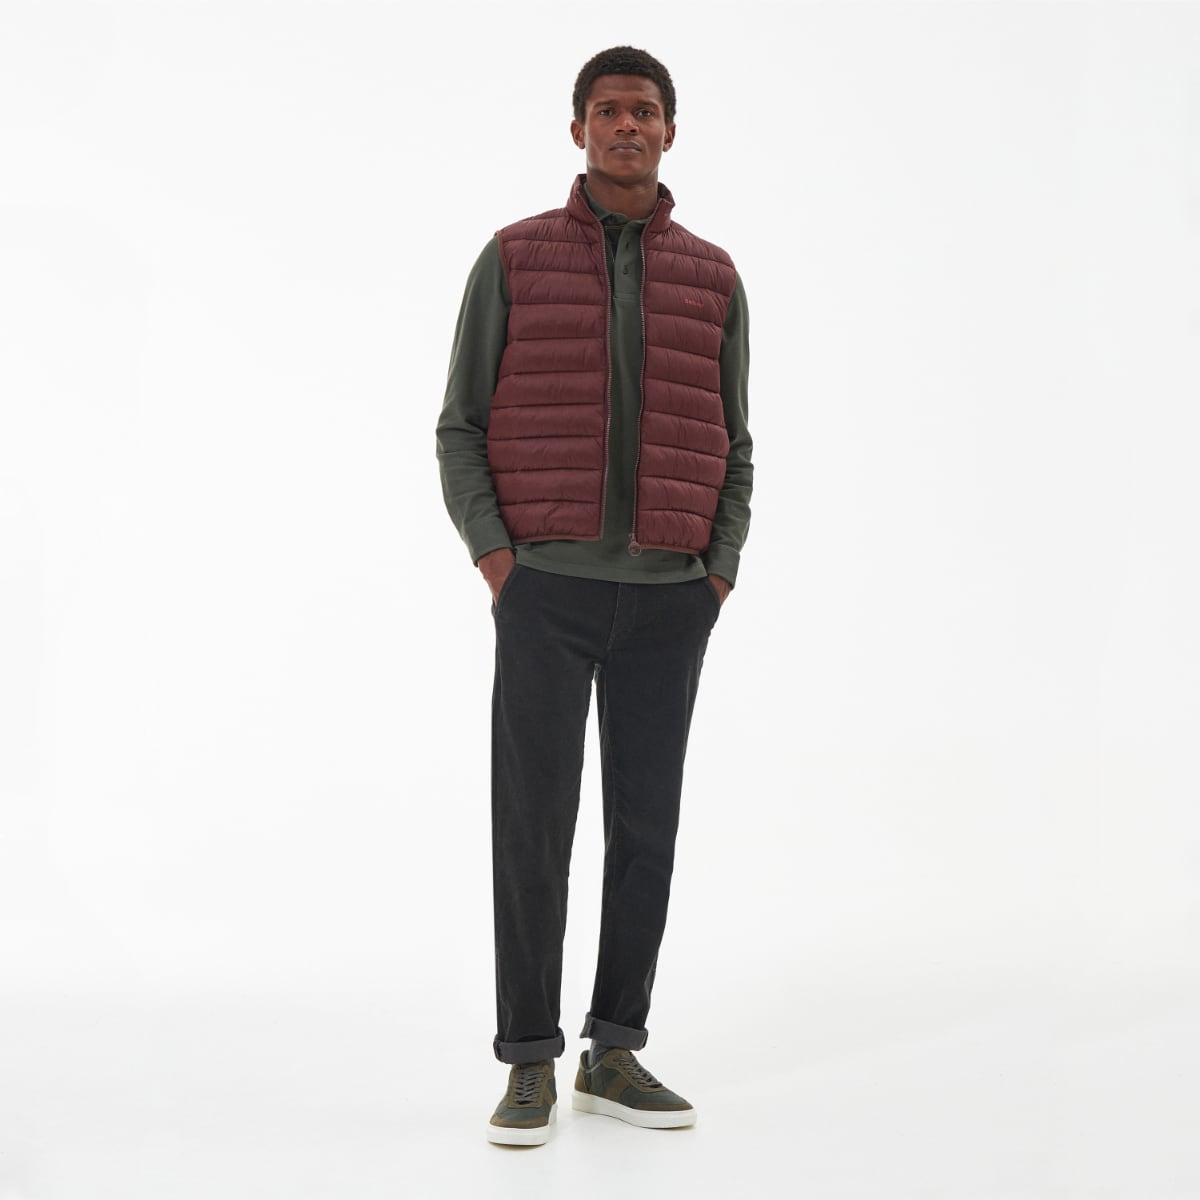 Barbour Bretby Insulated Men's Gilet | Truffle